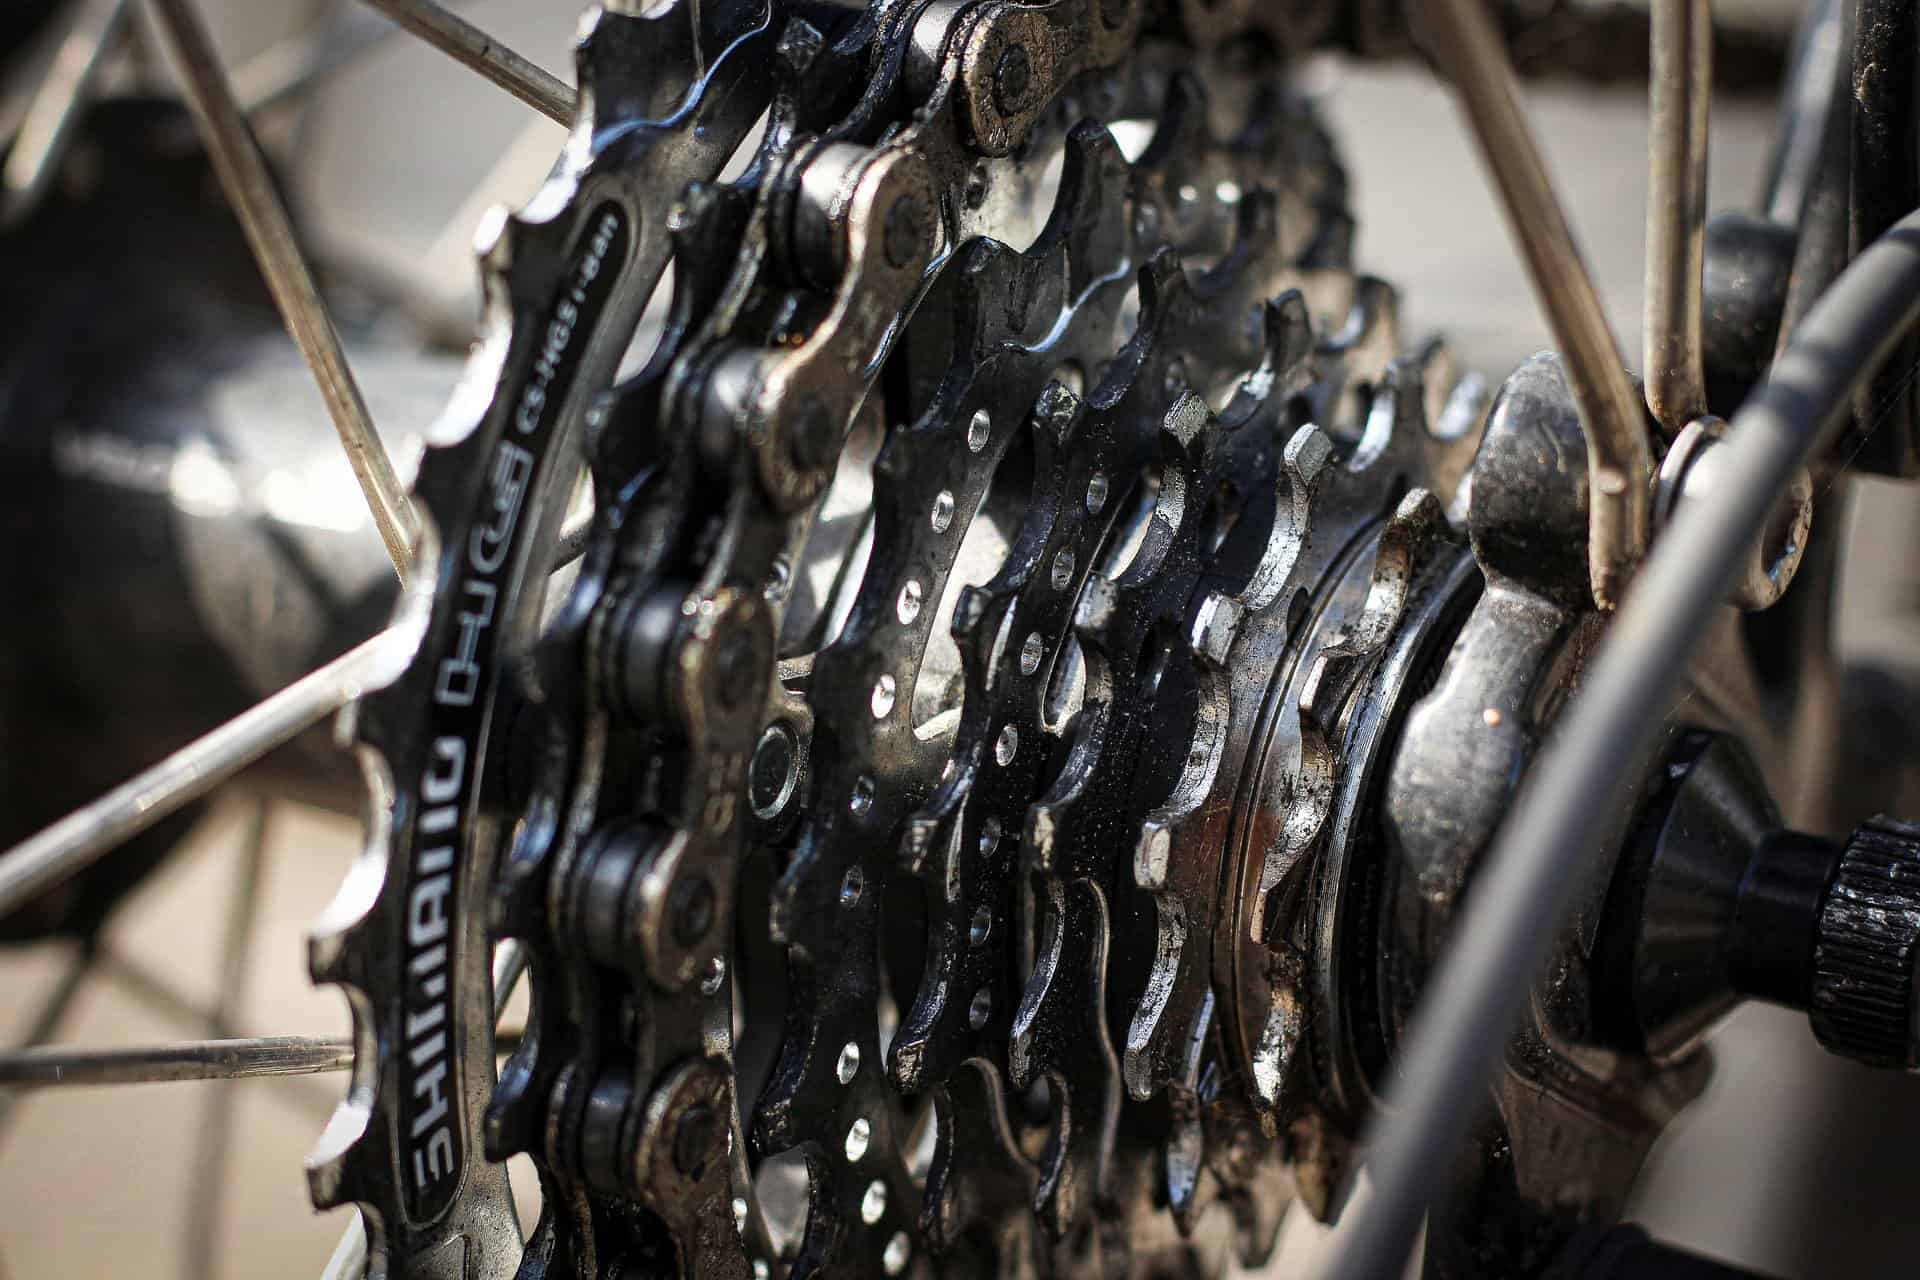 Bike Chain Skips When Pedaling Hard - The Cyclist Review